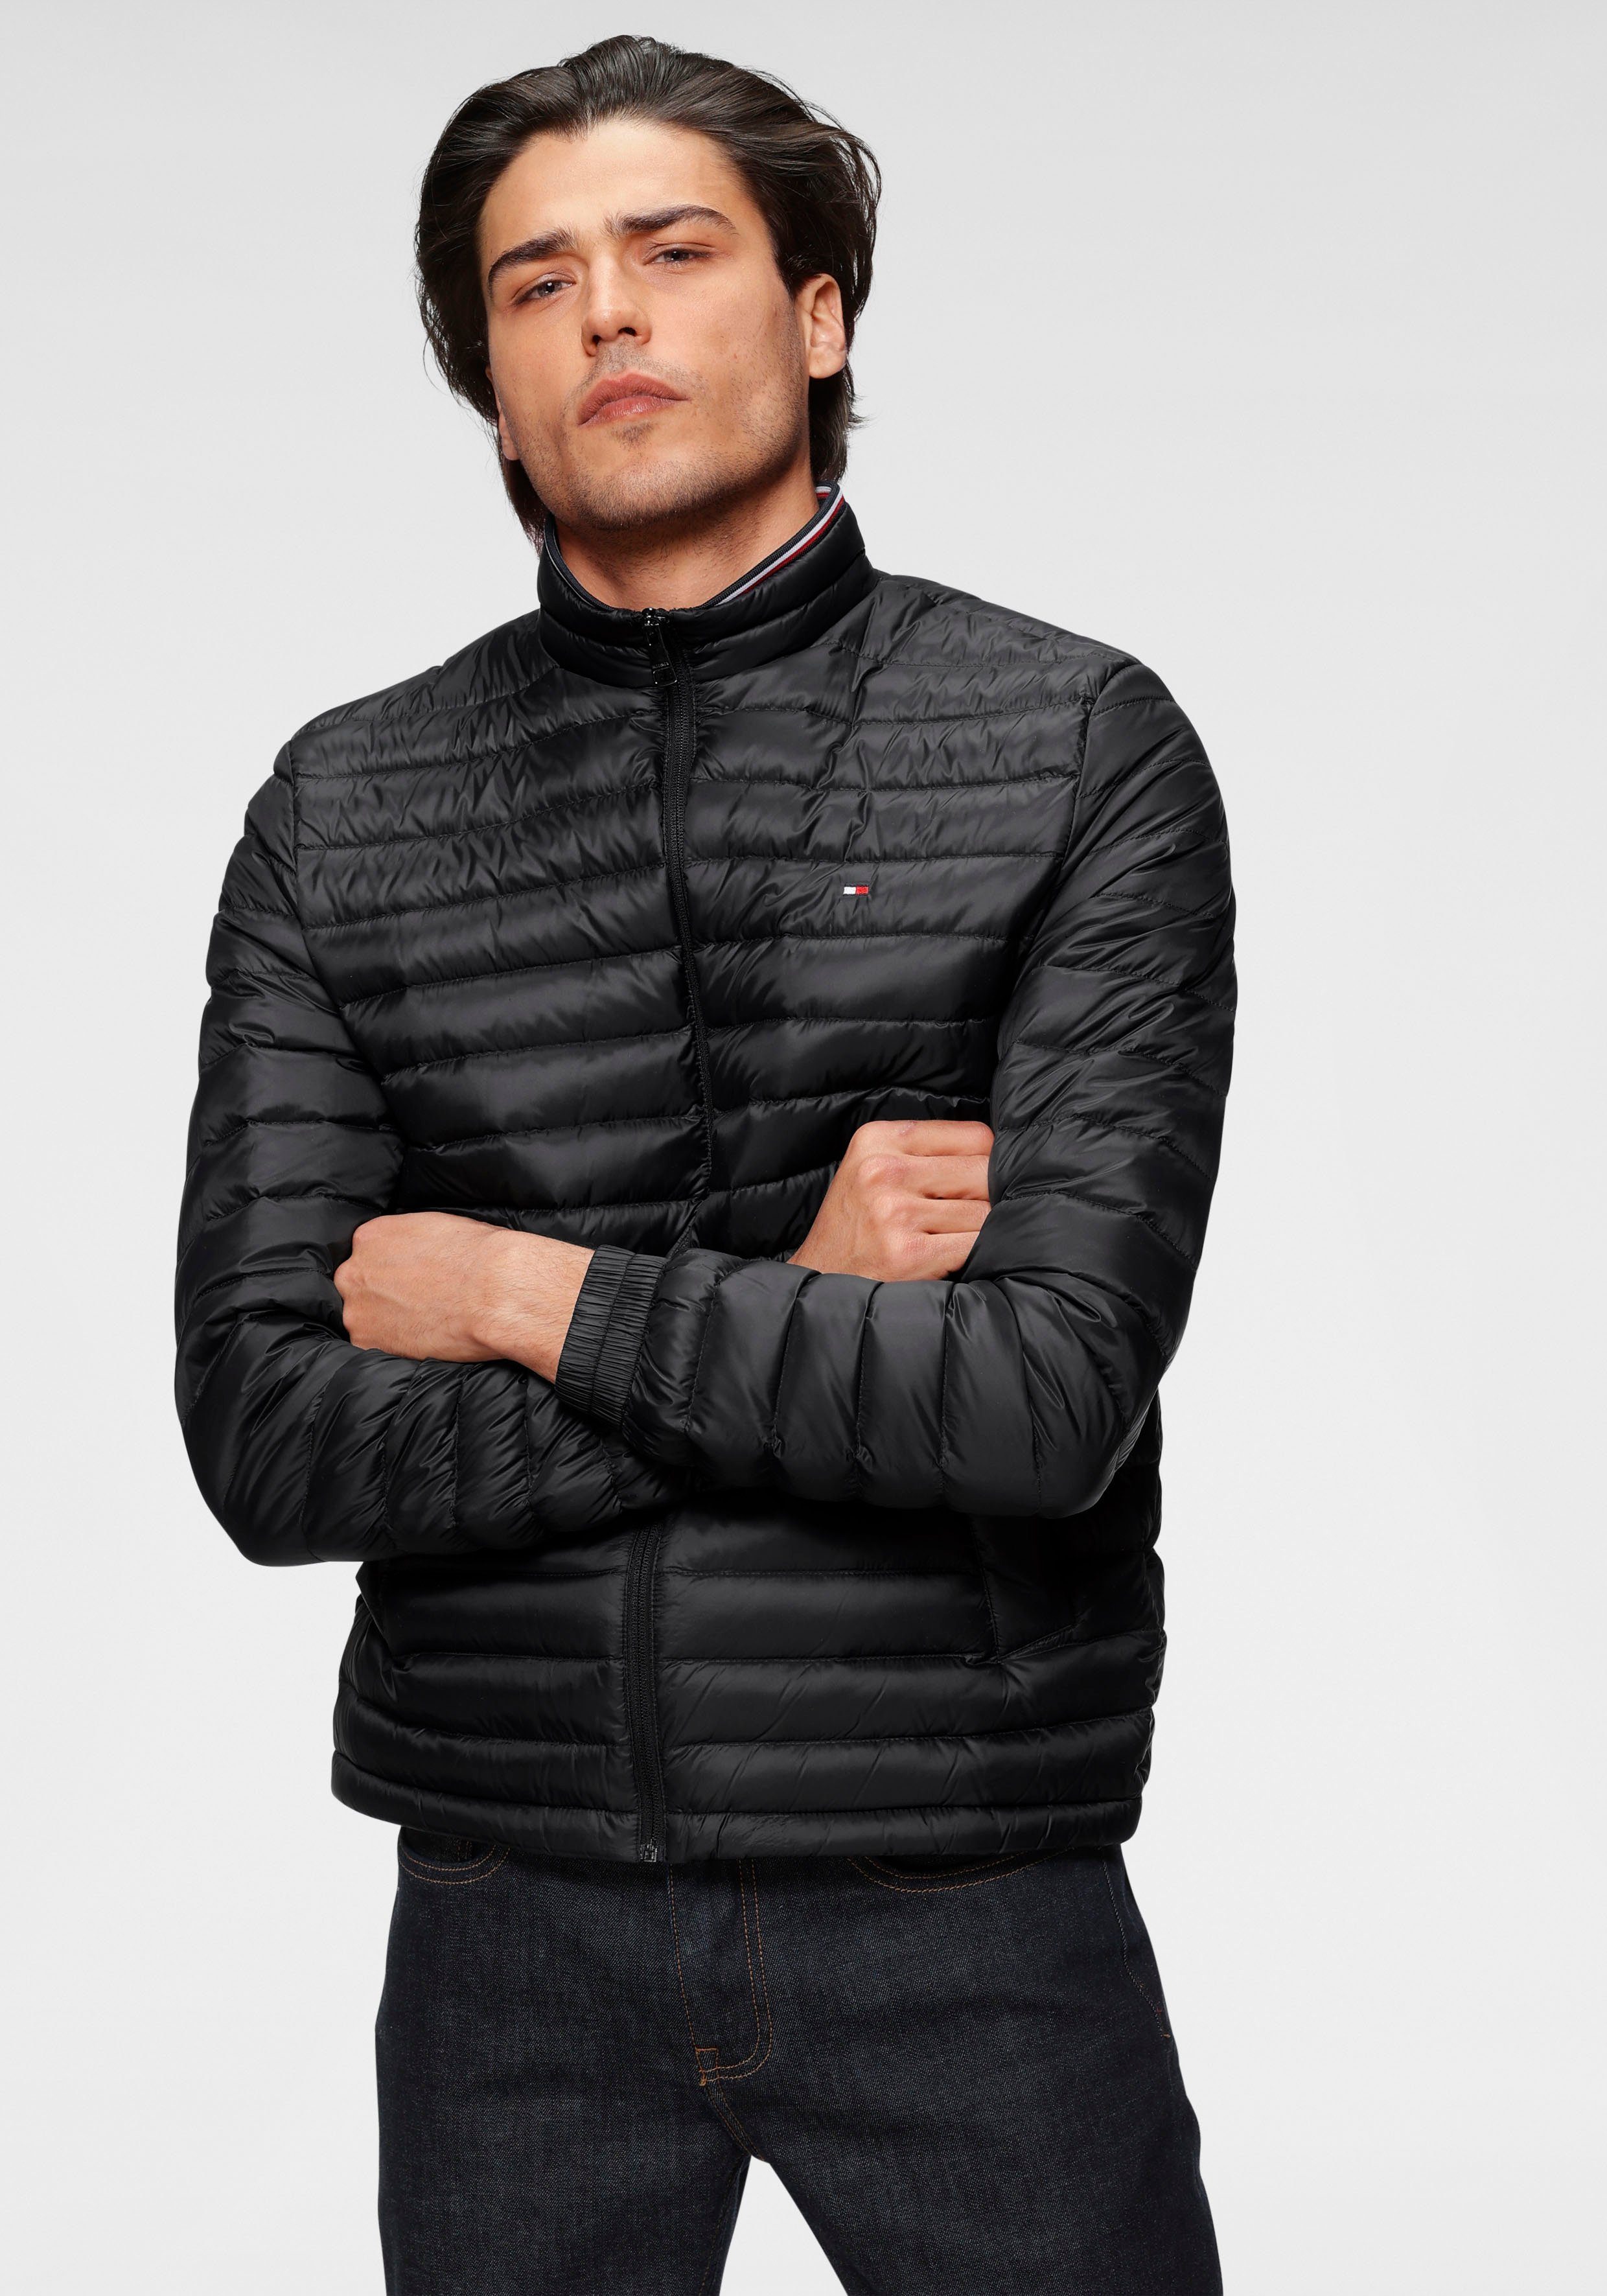 PACKABLE Hilfiger JACKET black CORE RECYCLED Tommy Steppjacke